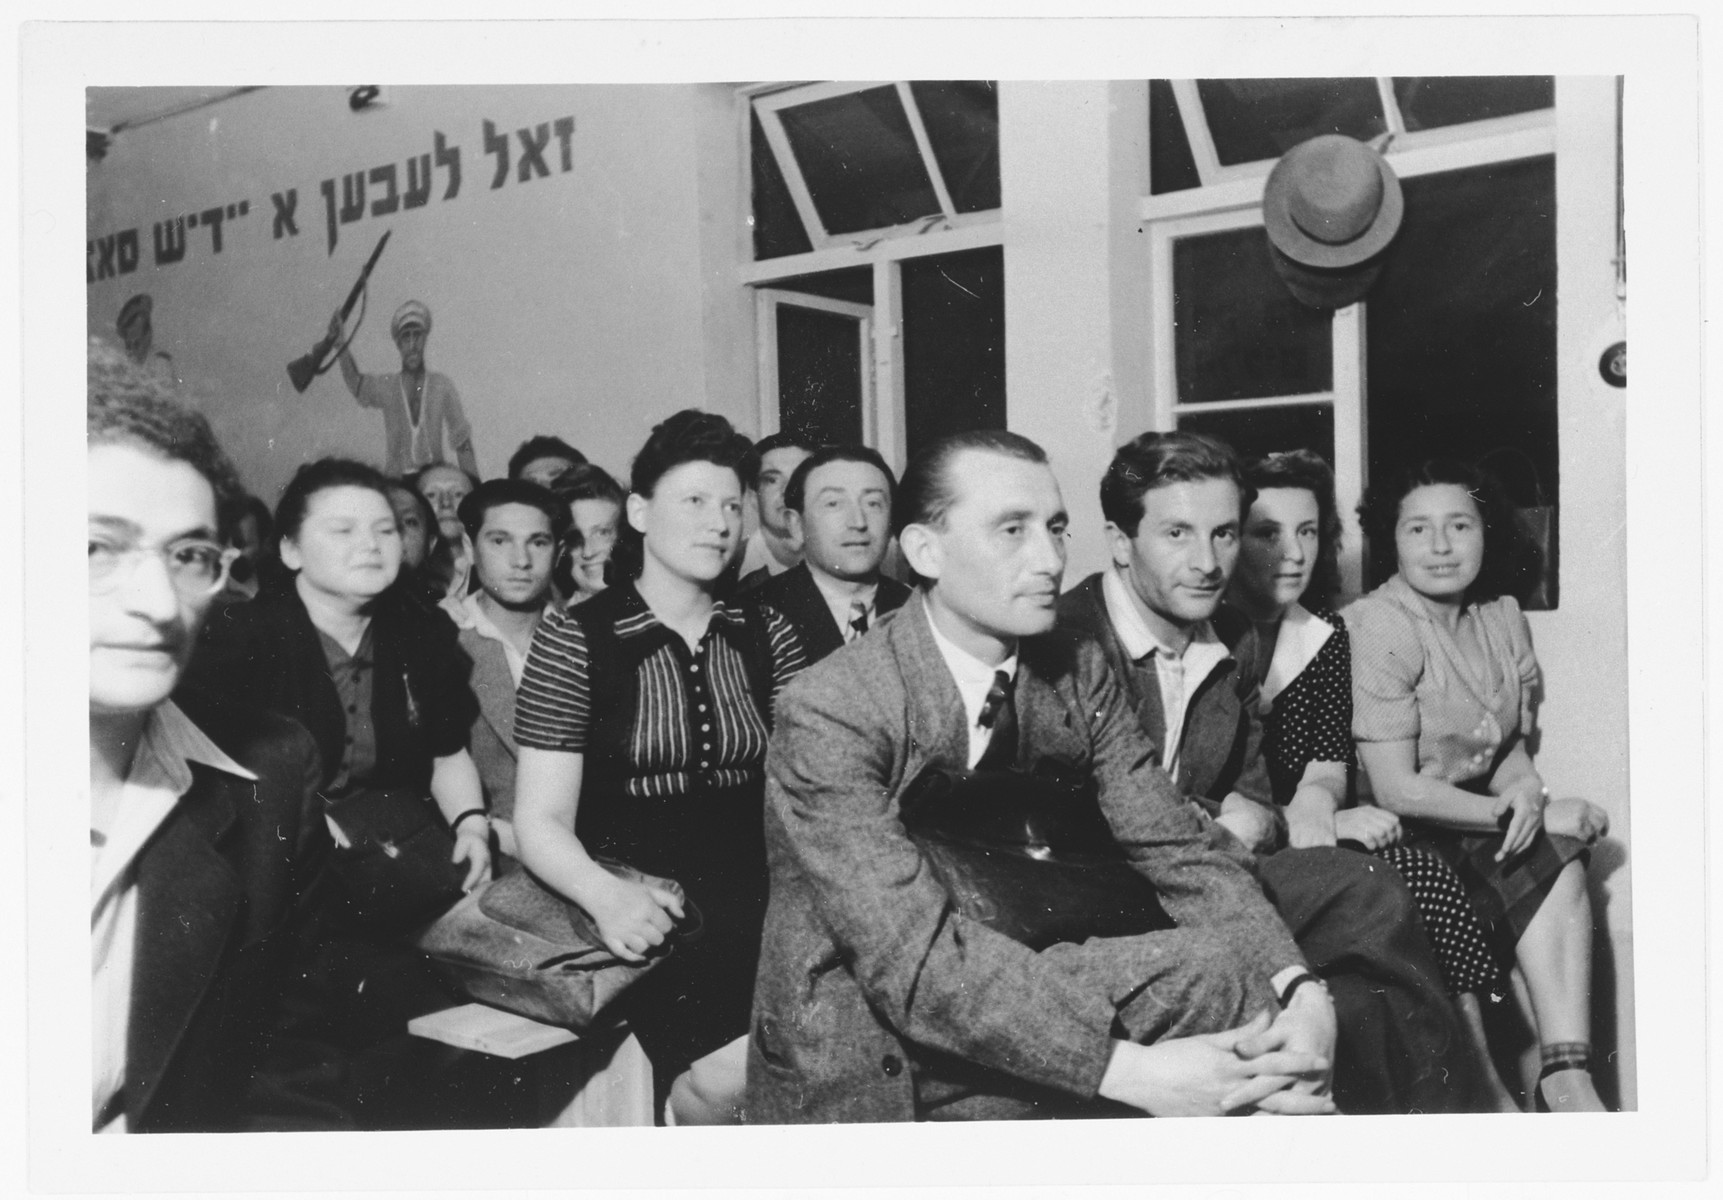 Zionist meeting in an auditorium of the Zeilsheim displaced persons' camp.